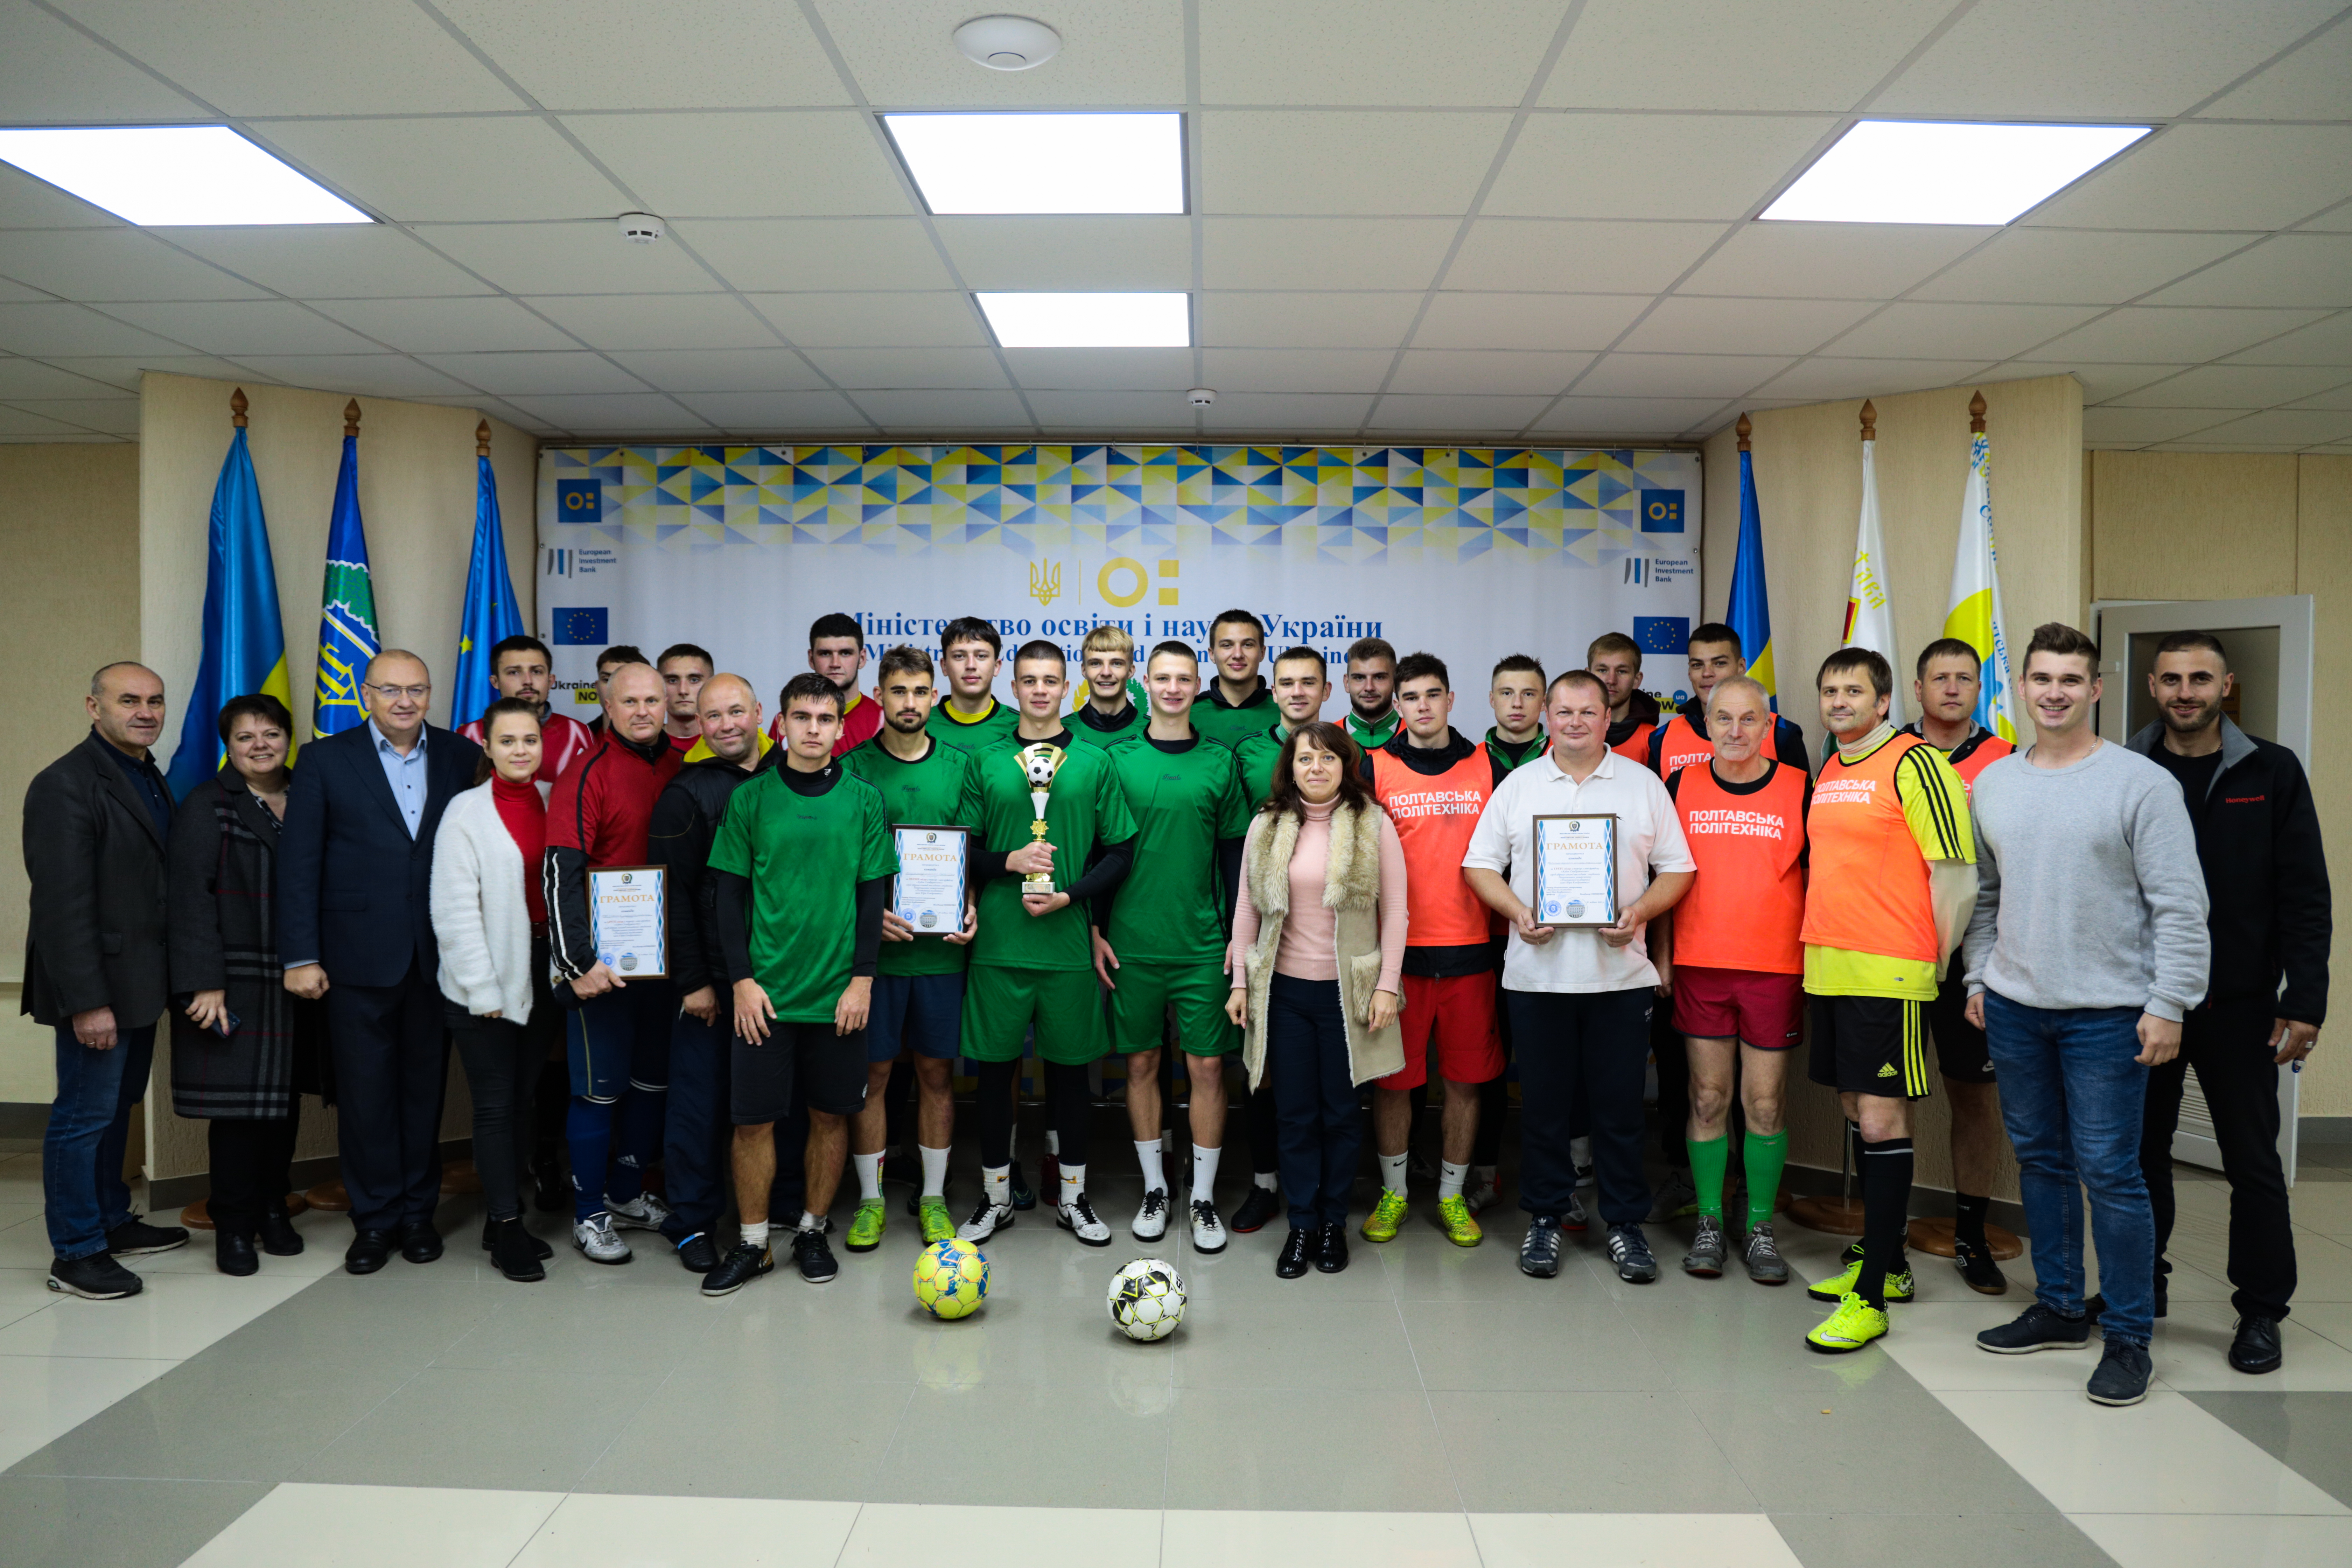 Team of the Faculty of Physical Culture and Sports wins the “Commonwealth Cup”